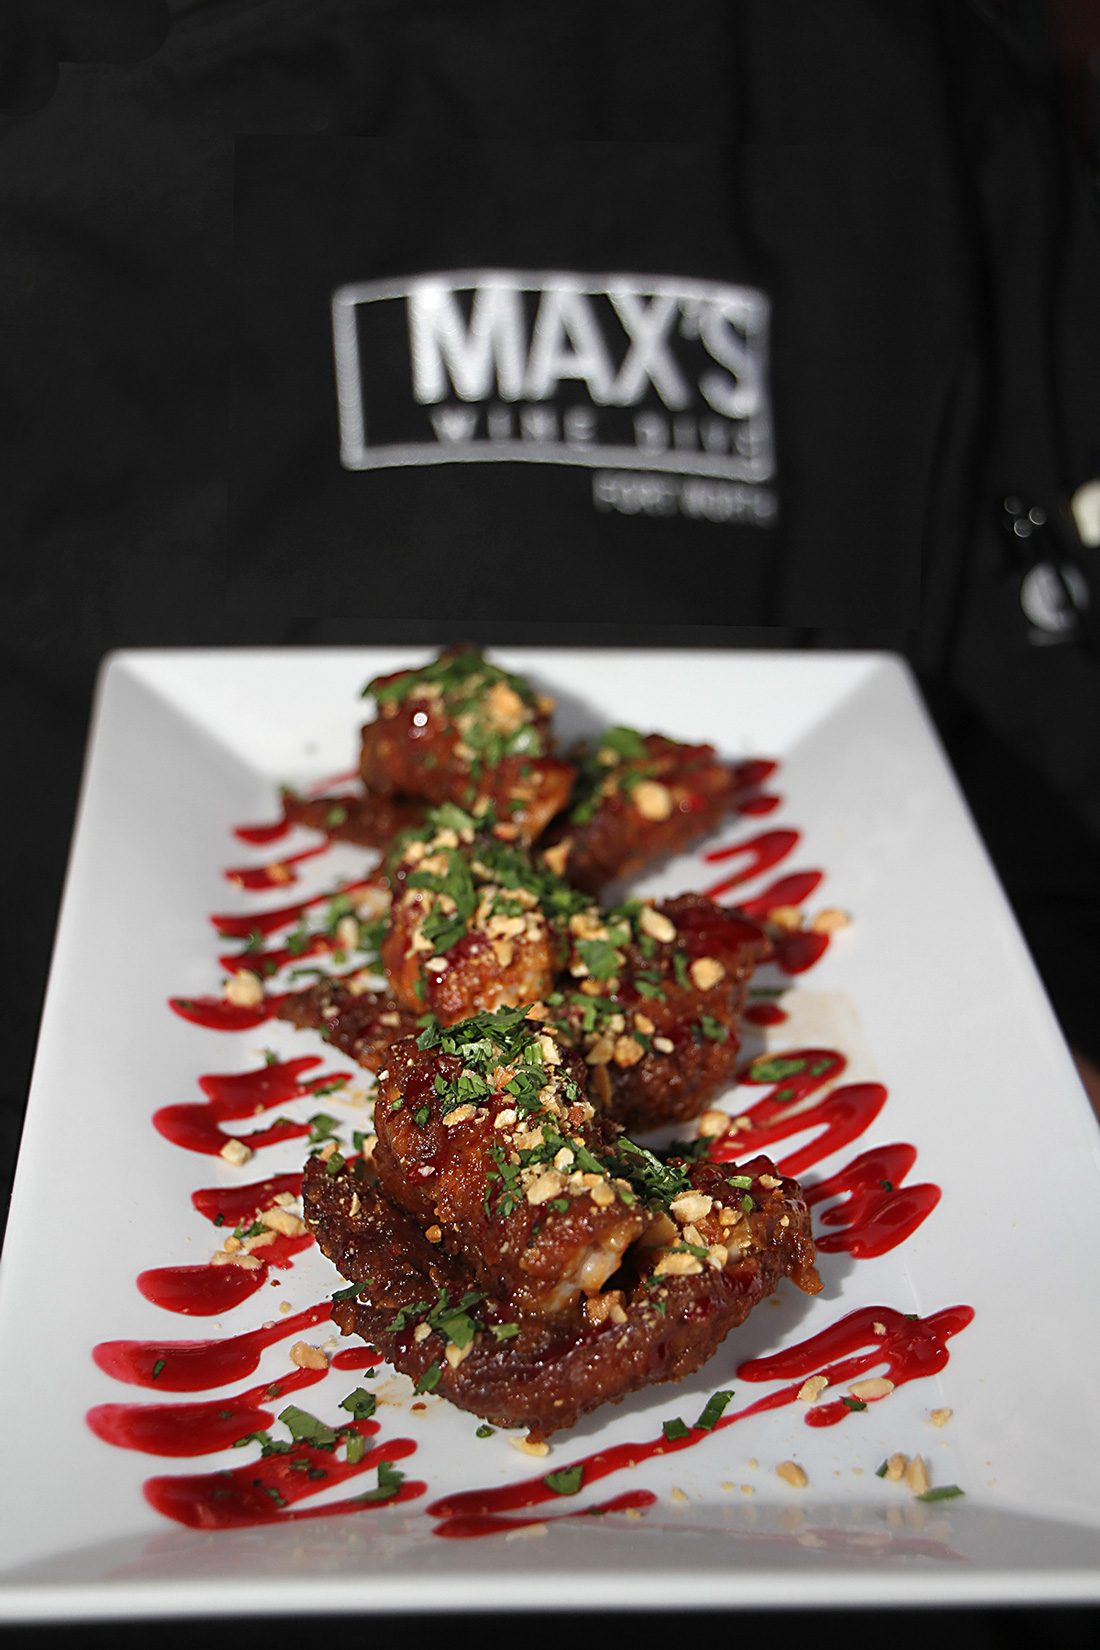 Peanut butter and jelly chicken wings await at Max’s. Lee Chastain